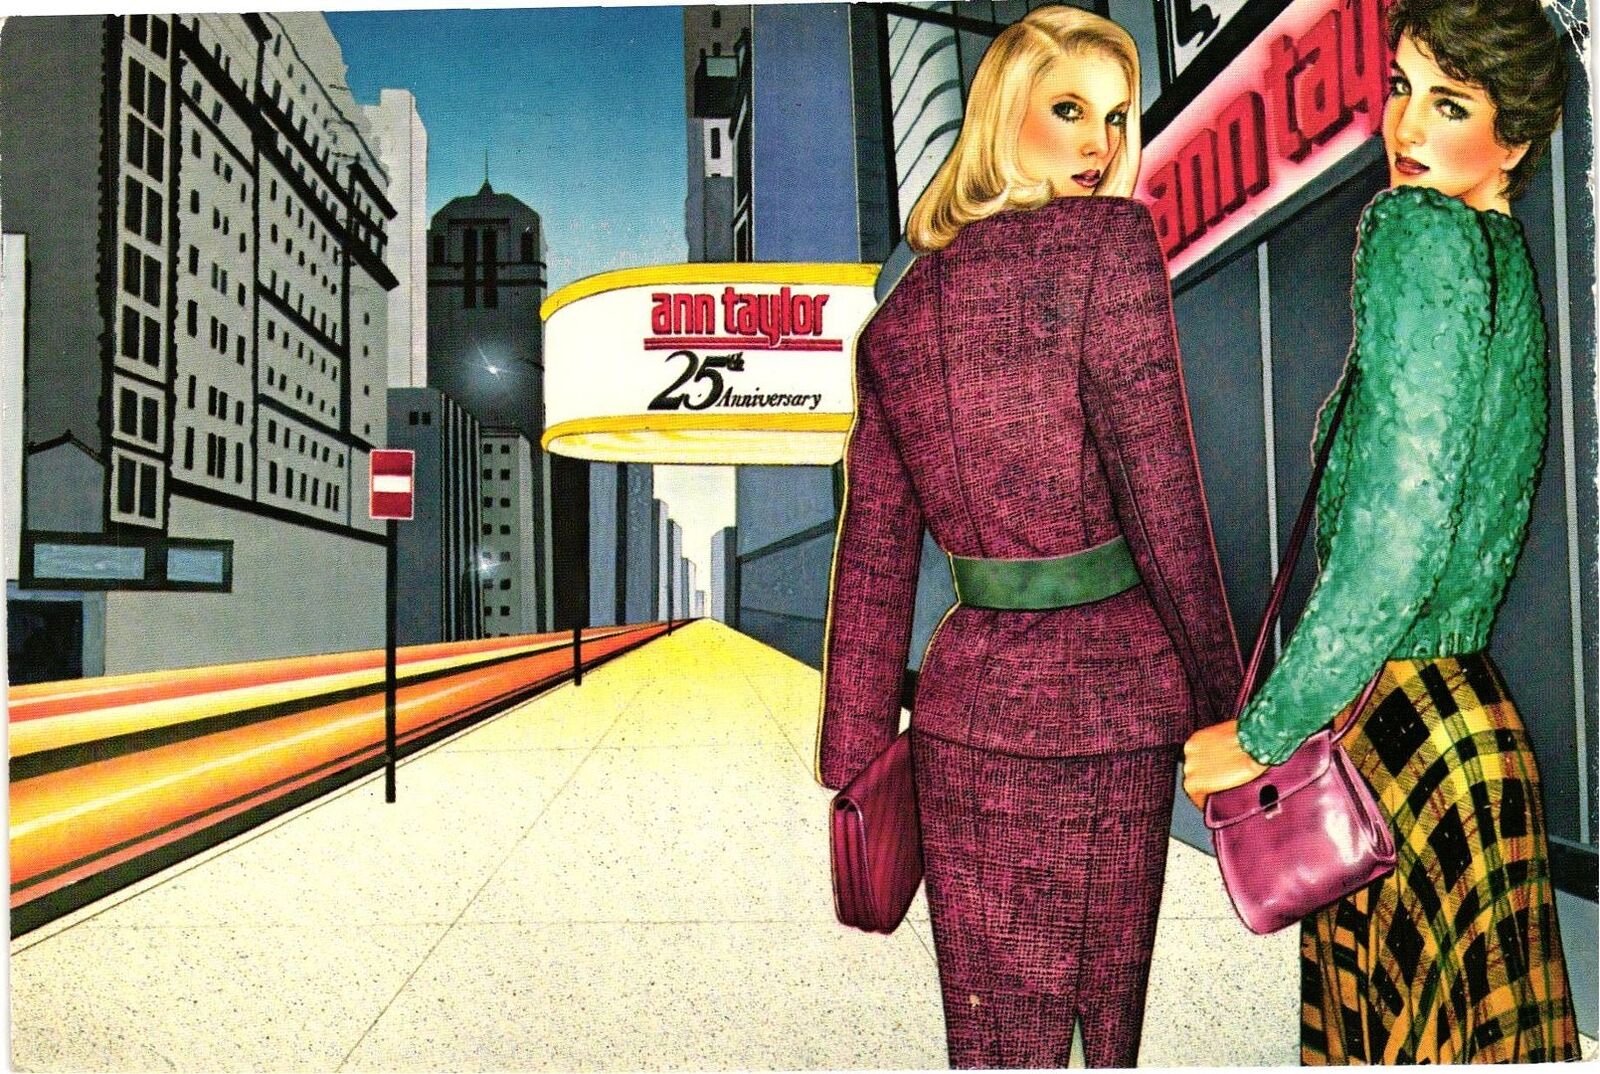 Vintage Postcard 4x6- Two fashionable women by Ann Taylor sign, New York, NY